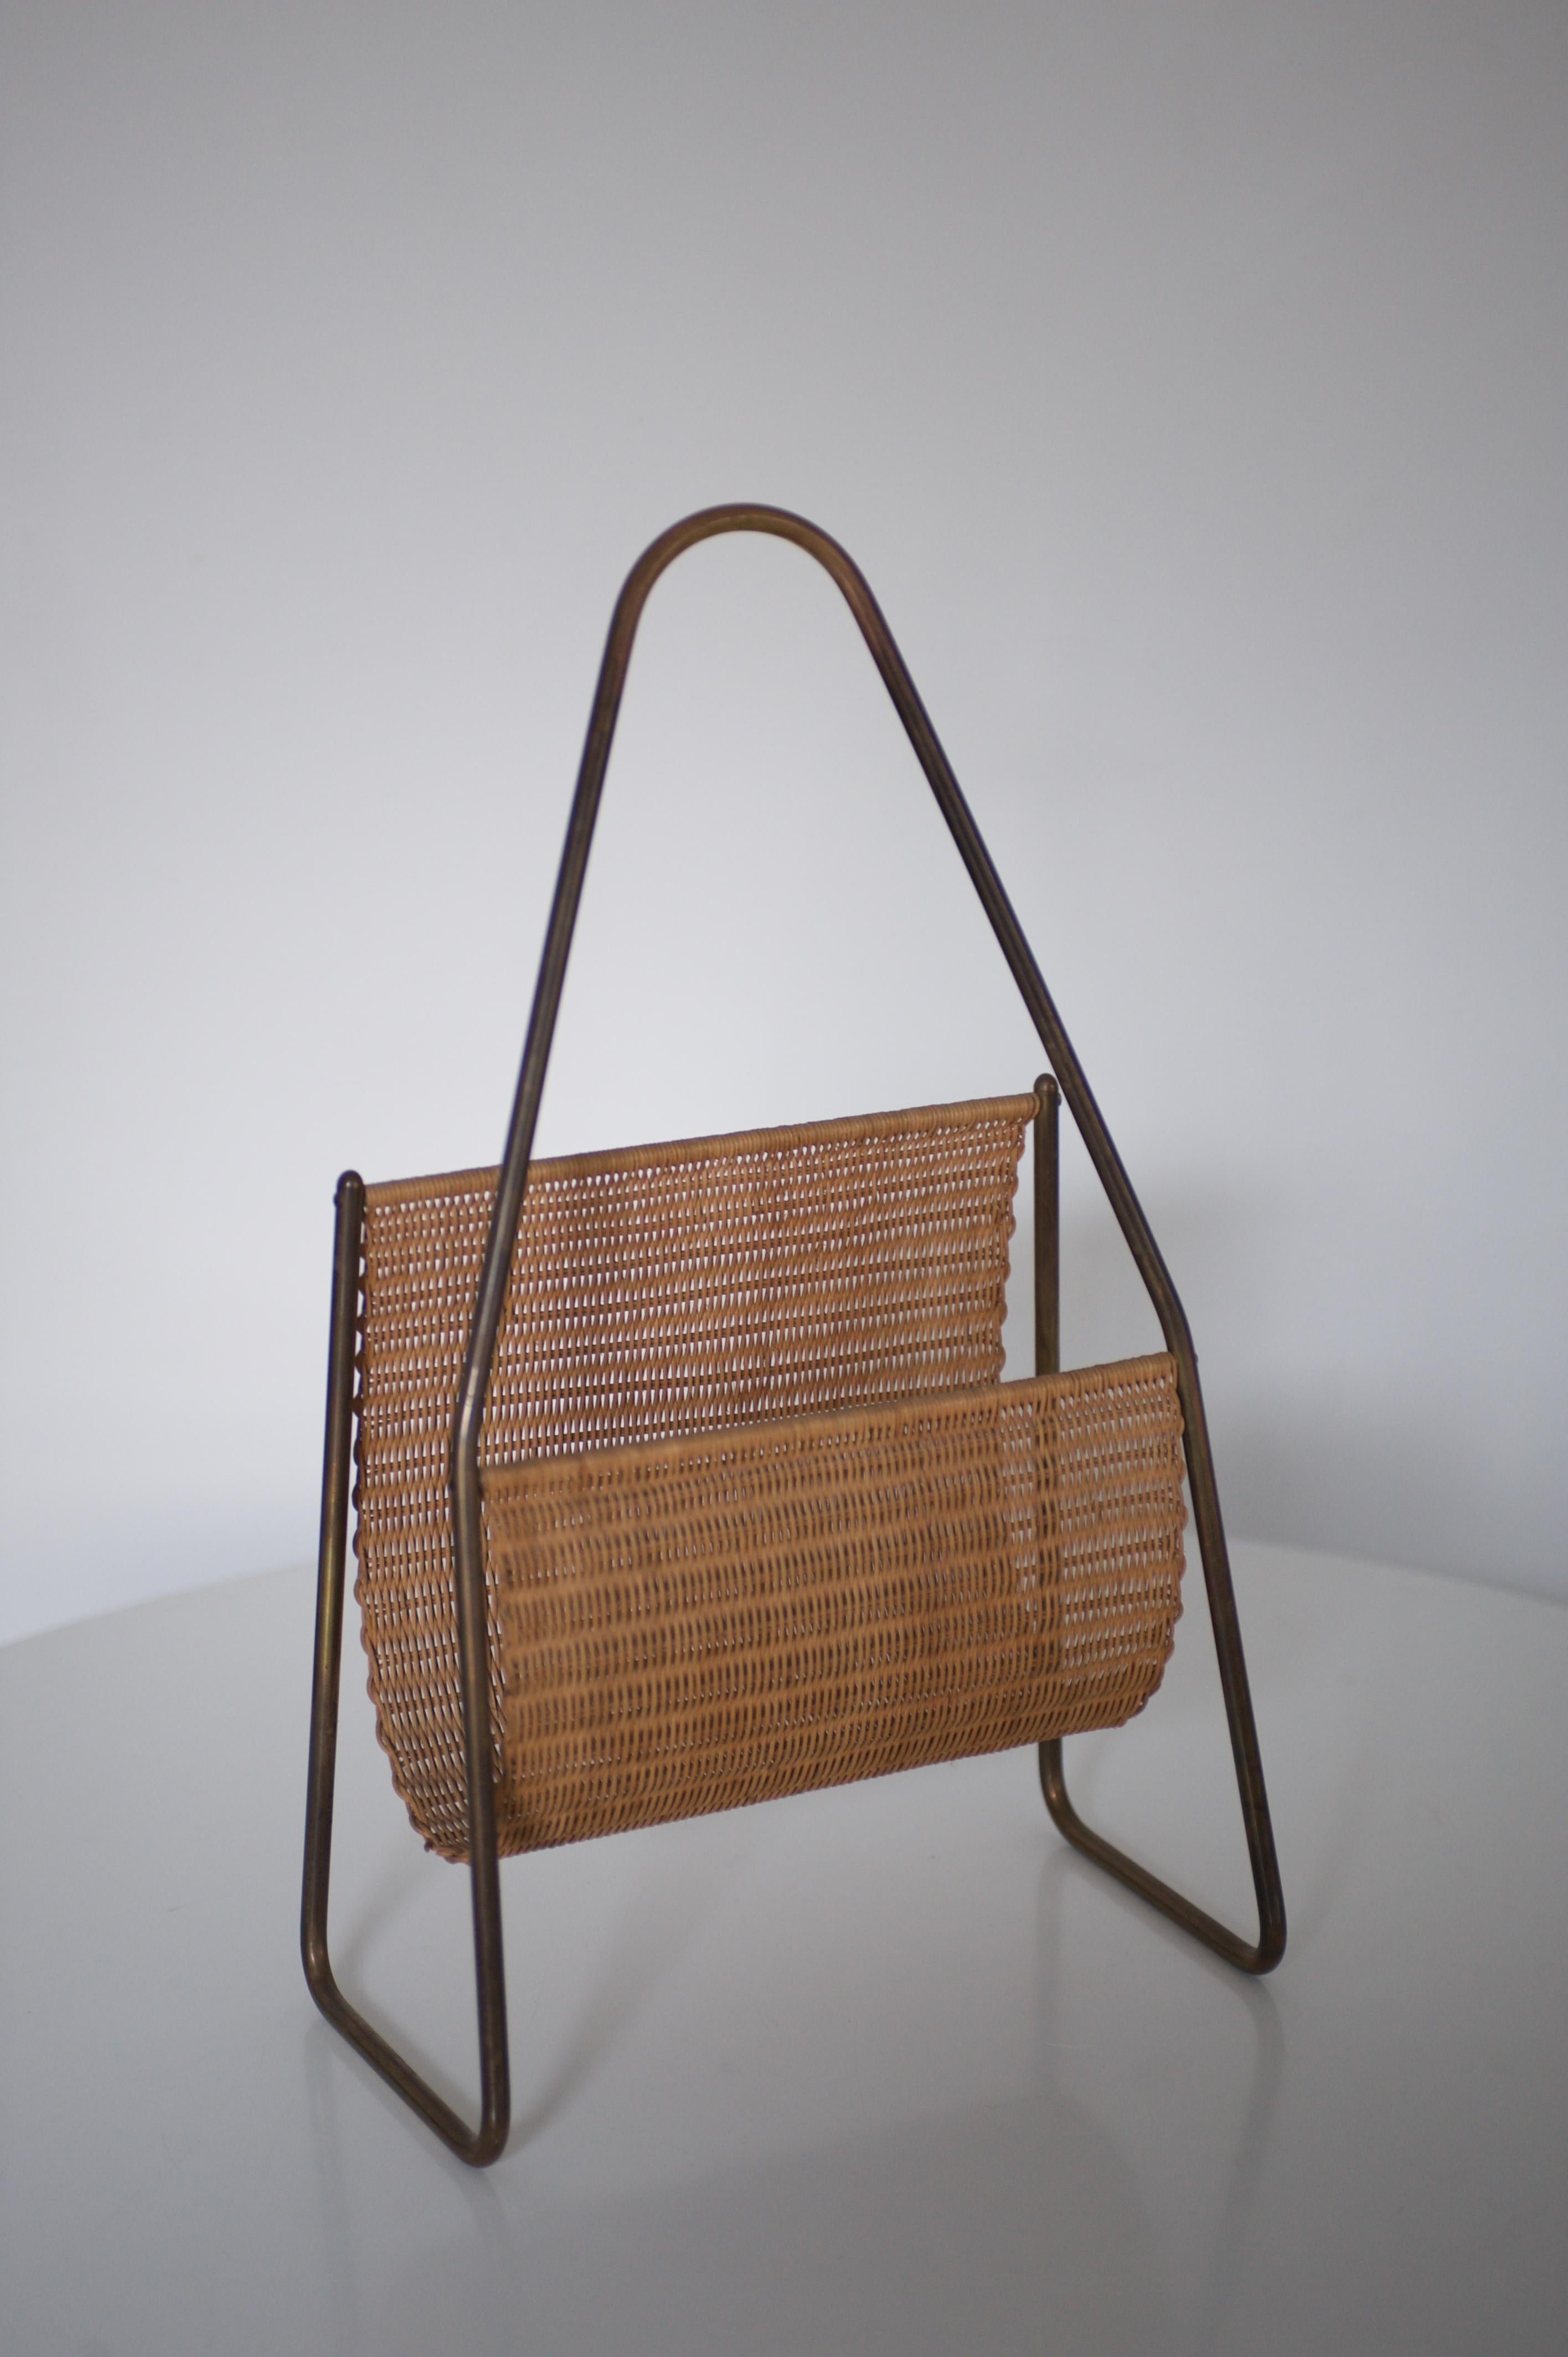 Magazine / Newspaper rack, no. 3808
1950 by Carl Auböck
brass frame and wicker work.

Measures: 15.5 x 31.5 cm, H 50 cm / 6.10 x 12.40 in, H 19.69 in.

Very good condition!

Literature: Clemens Kois; Carl Auböck - The Workshop, powerHouse